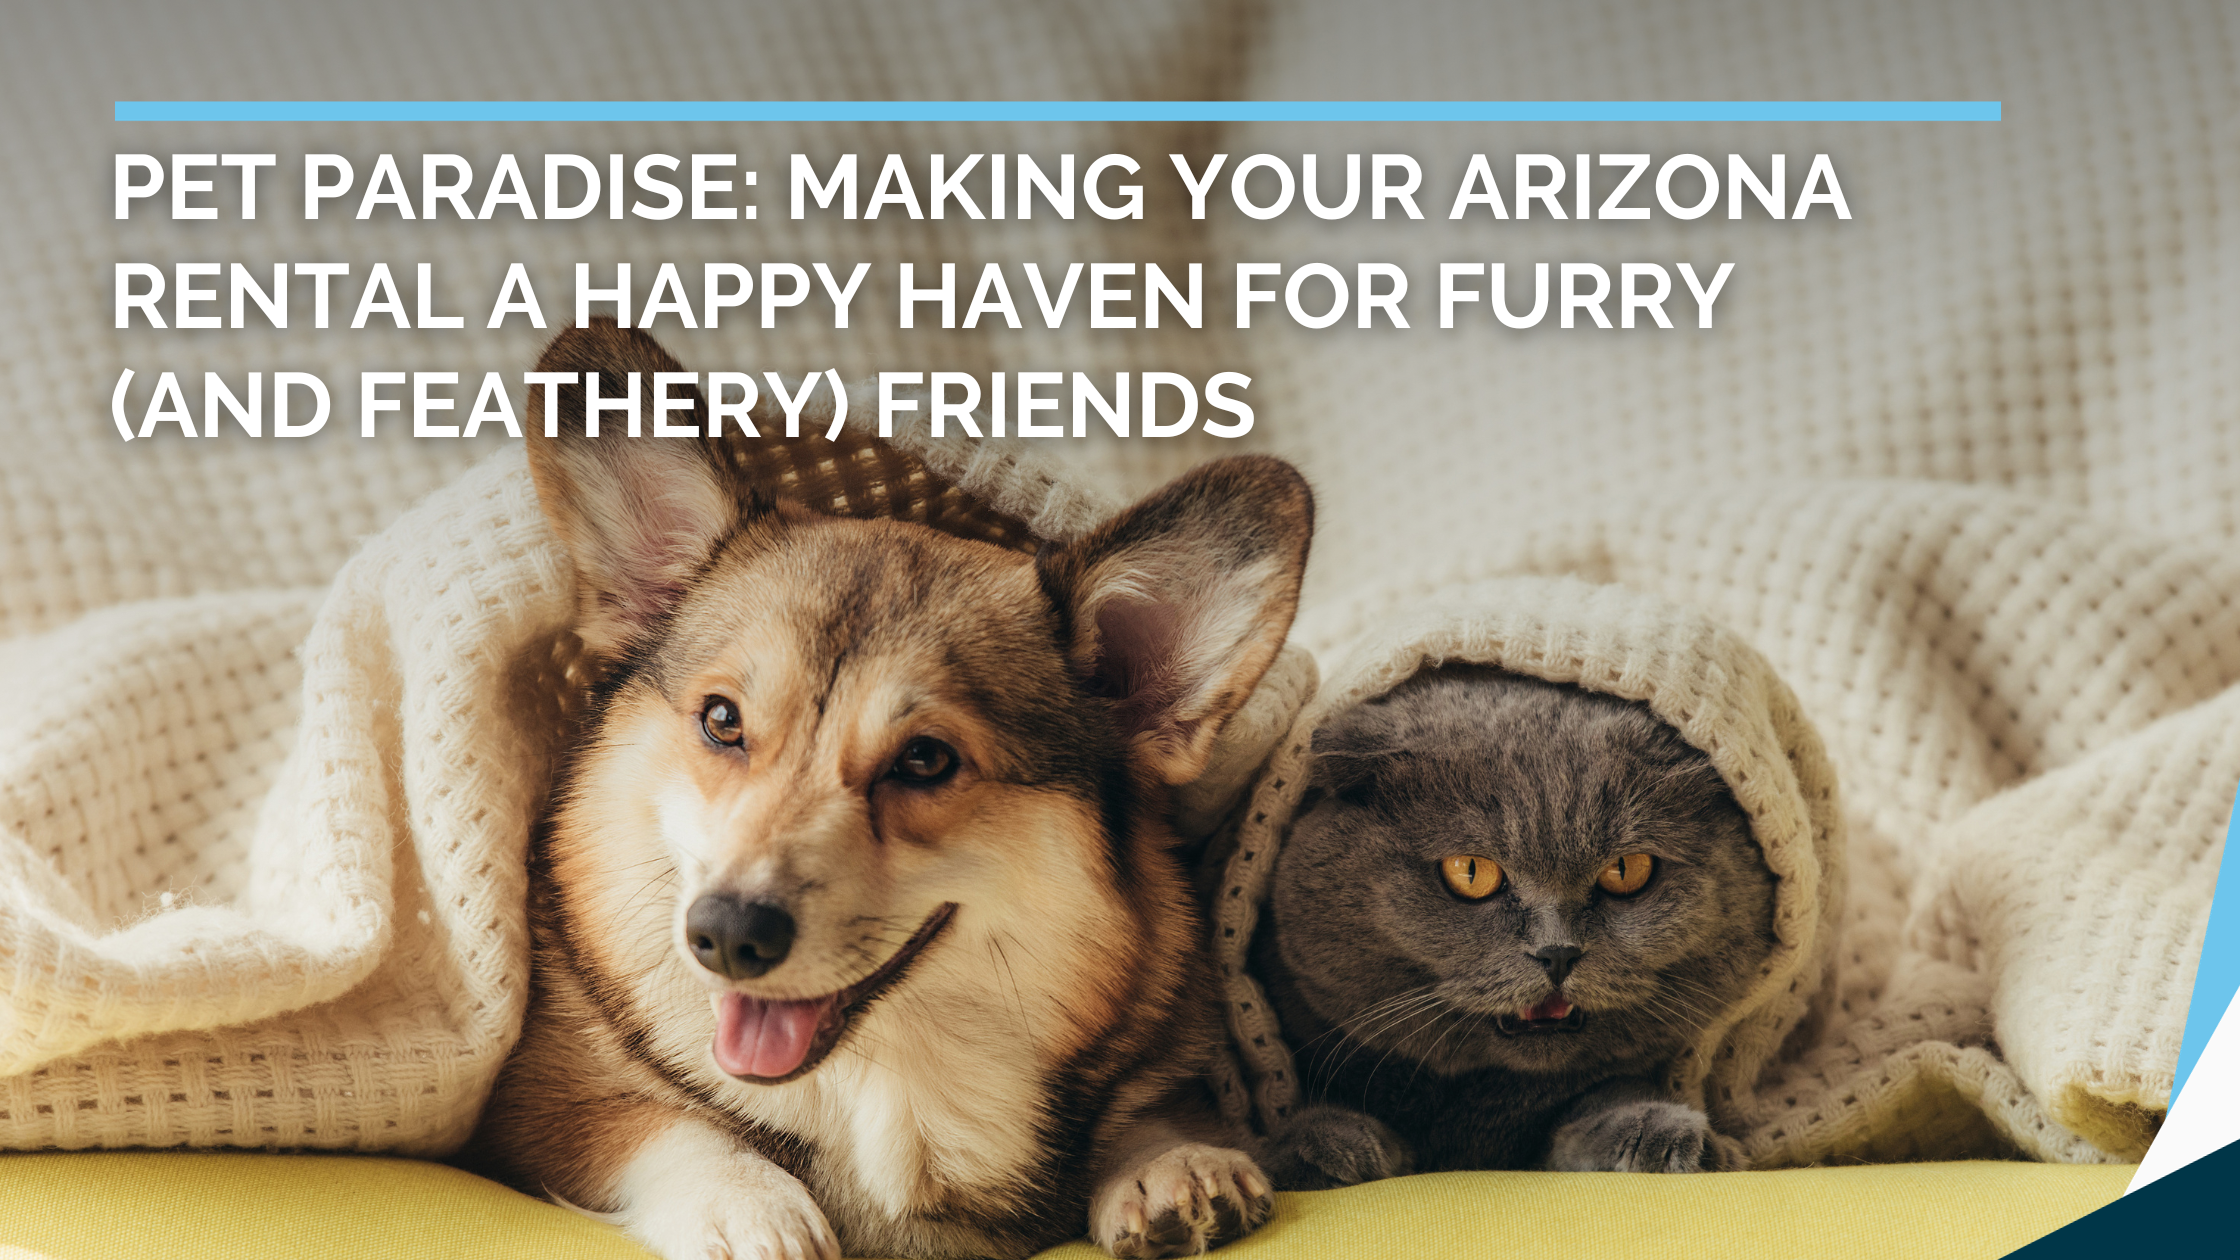 Pet Paradise: Making Your Arizona Rental A Happy Haven for Furry (and Feathery) Friends